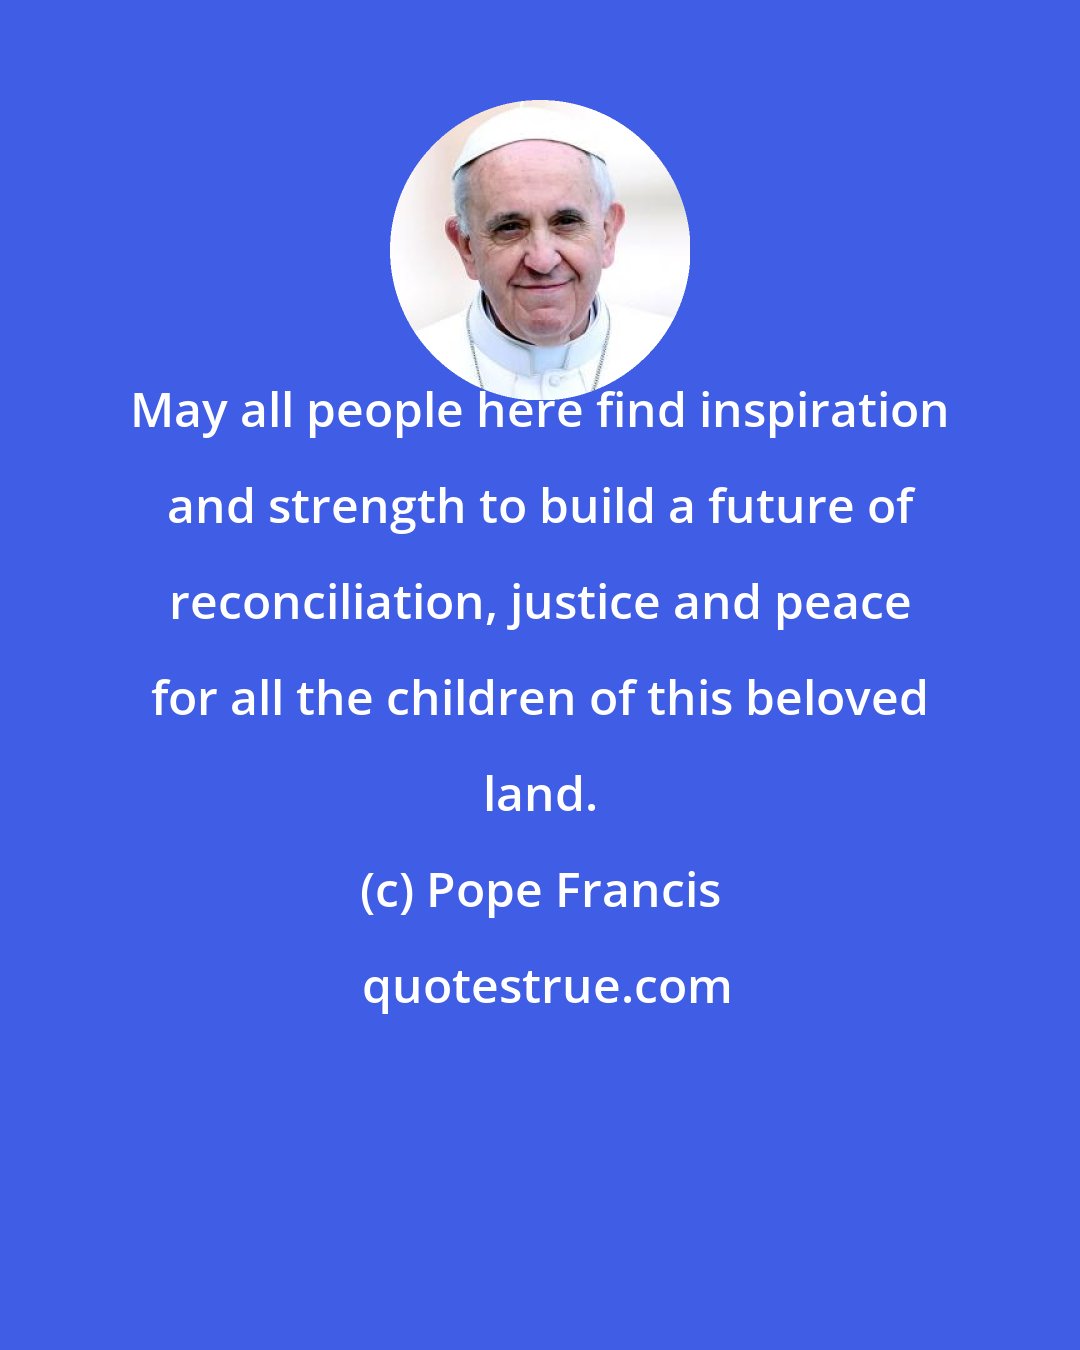 Pope Francis: May all people here find inspiration and strength to build a future of reconciliation, justice and peace for all the children of this beloved land.